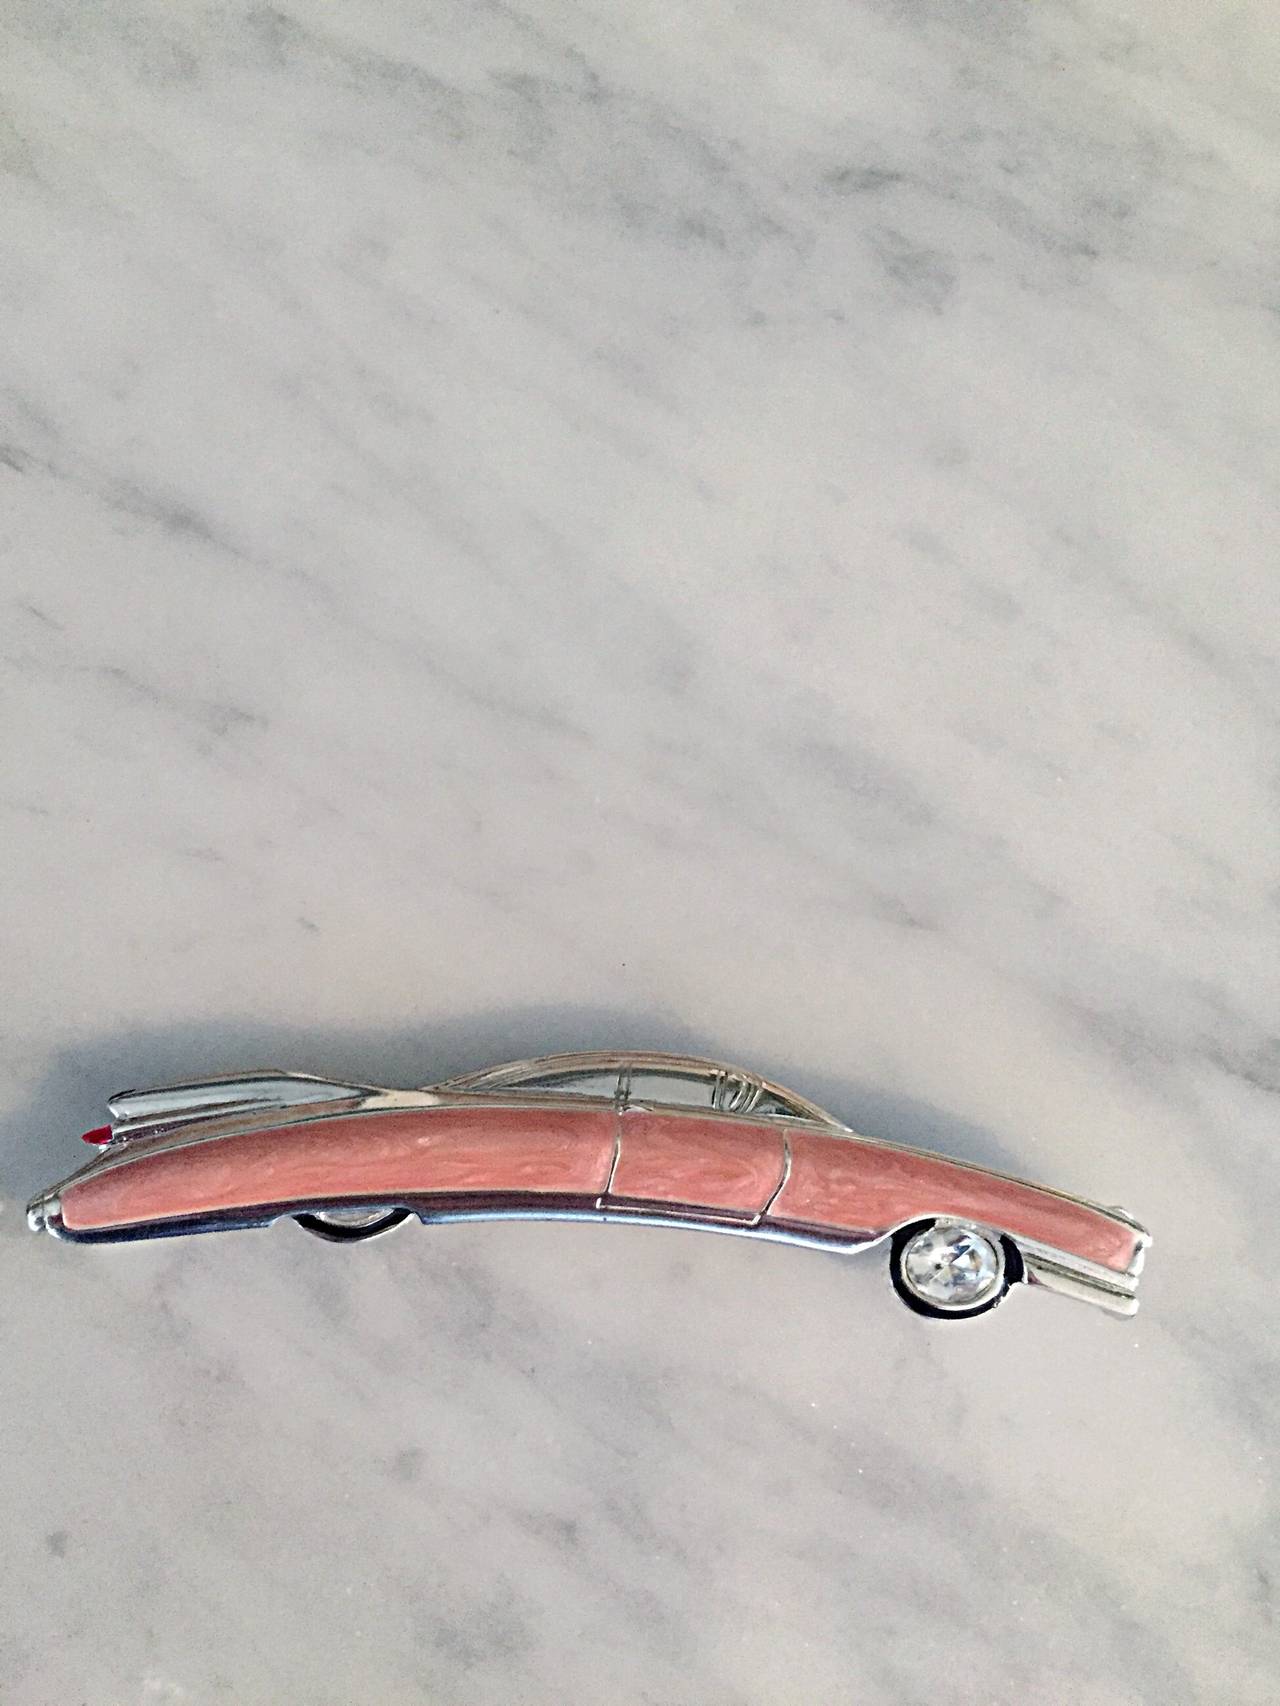 Amazing vintage Bob Mackie 'Pink Cadillac' brooch/pin! The perfect accessory for any blouse, sweater, or jacket! Pink enamel, with intricate details. Signed 'Bob Mackie' on back. In great condition. Measures 4 inches long.